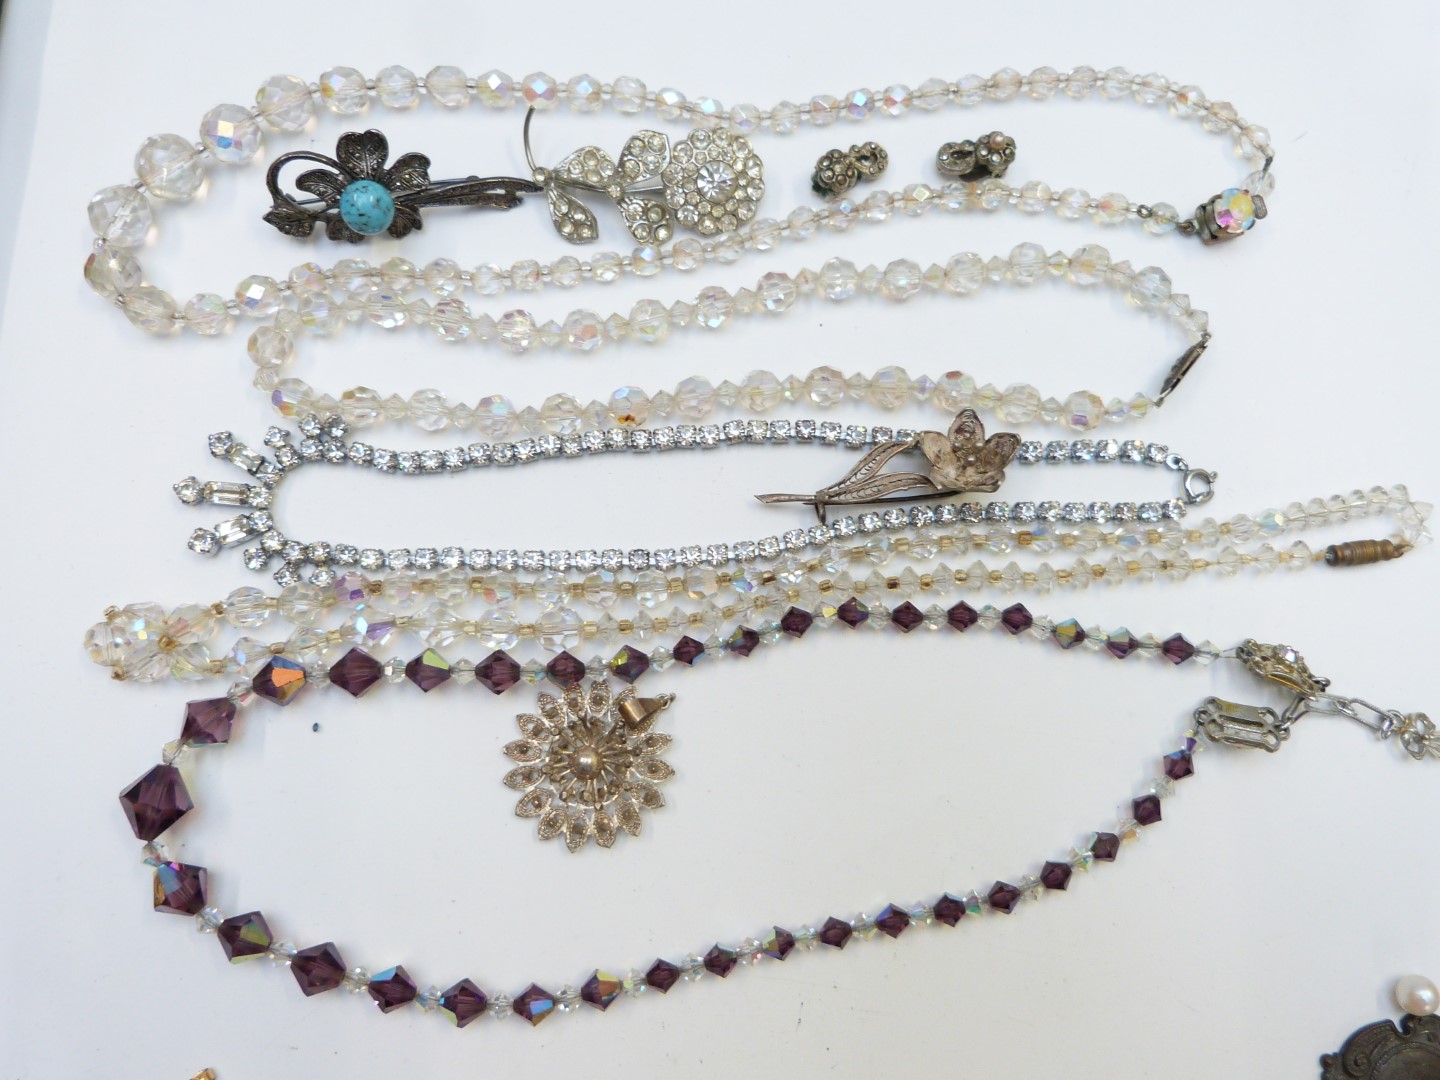 A collection of costume jewellery including Trifari necklace, crystal beads, faux pearls, diamanté - Image 3 of 6